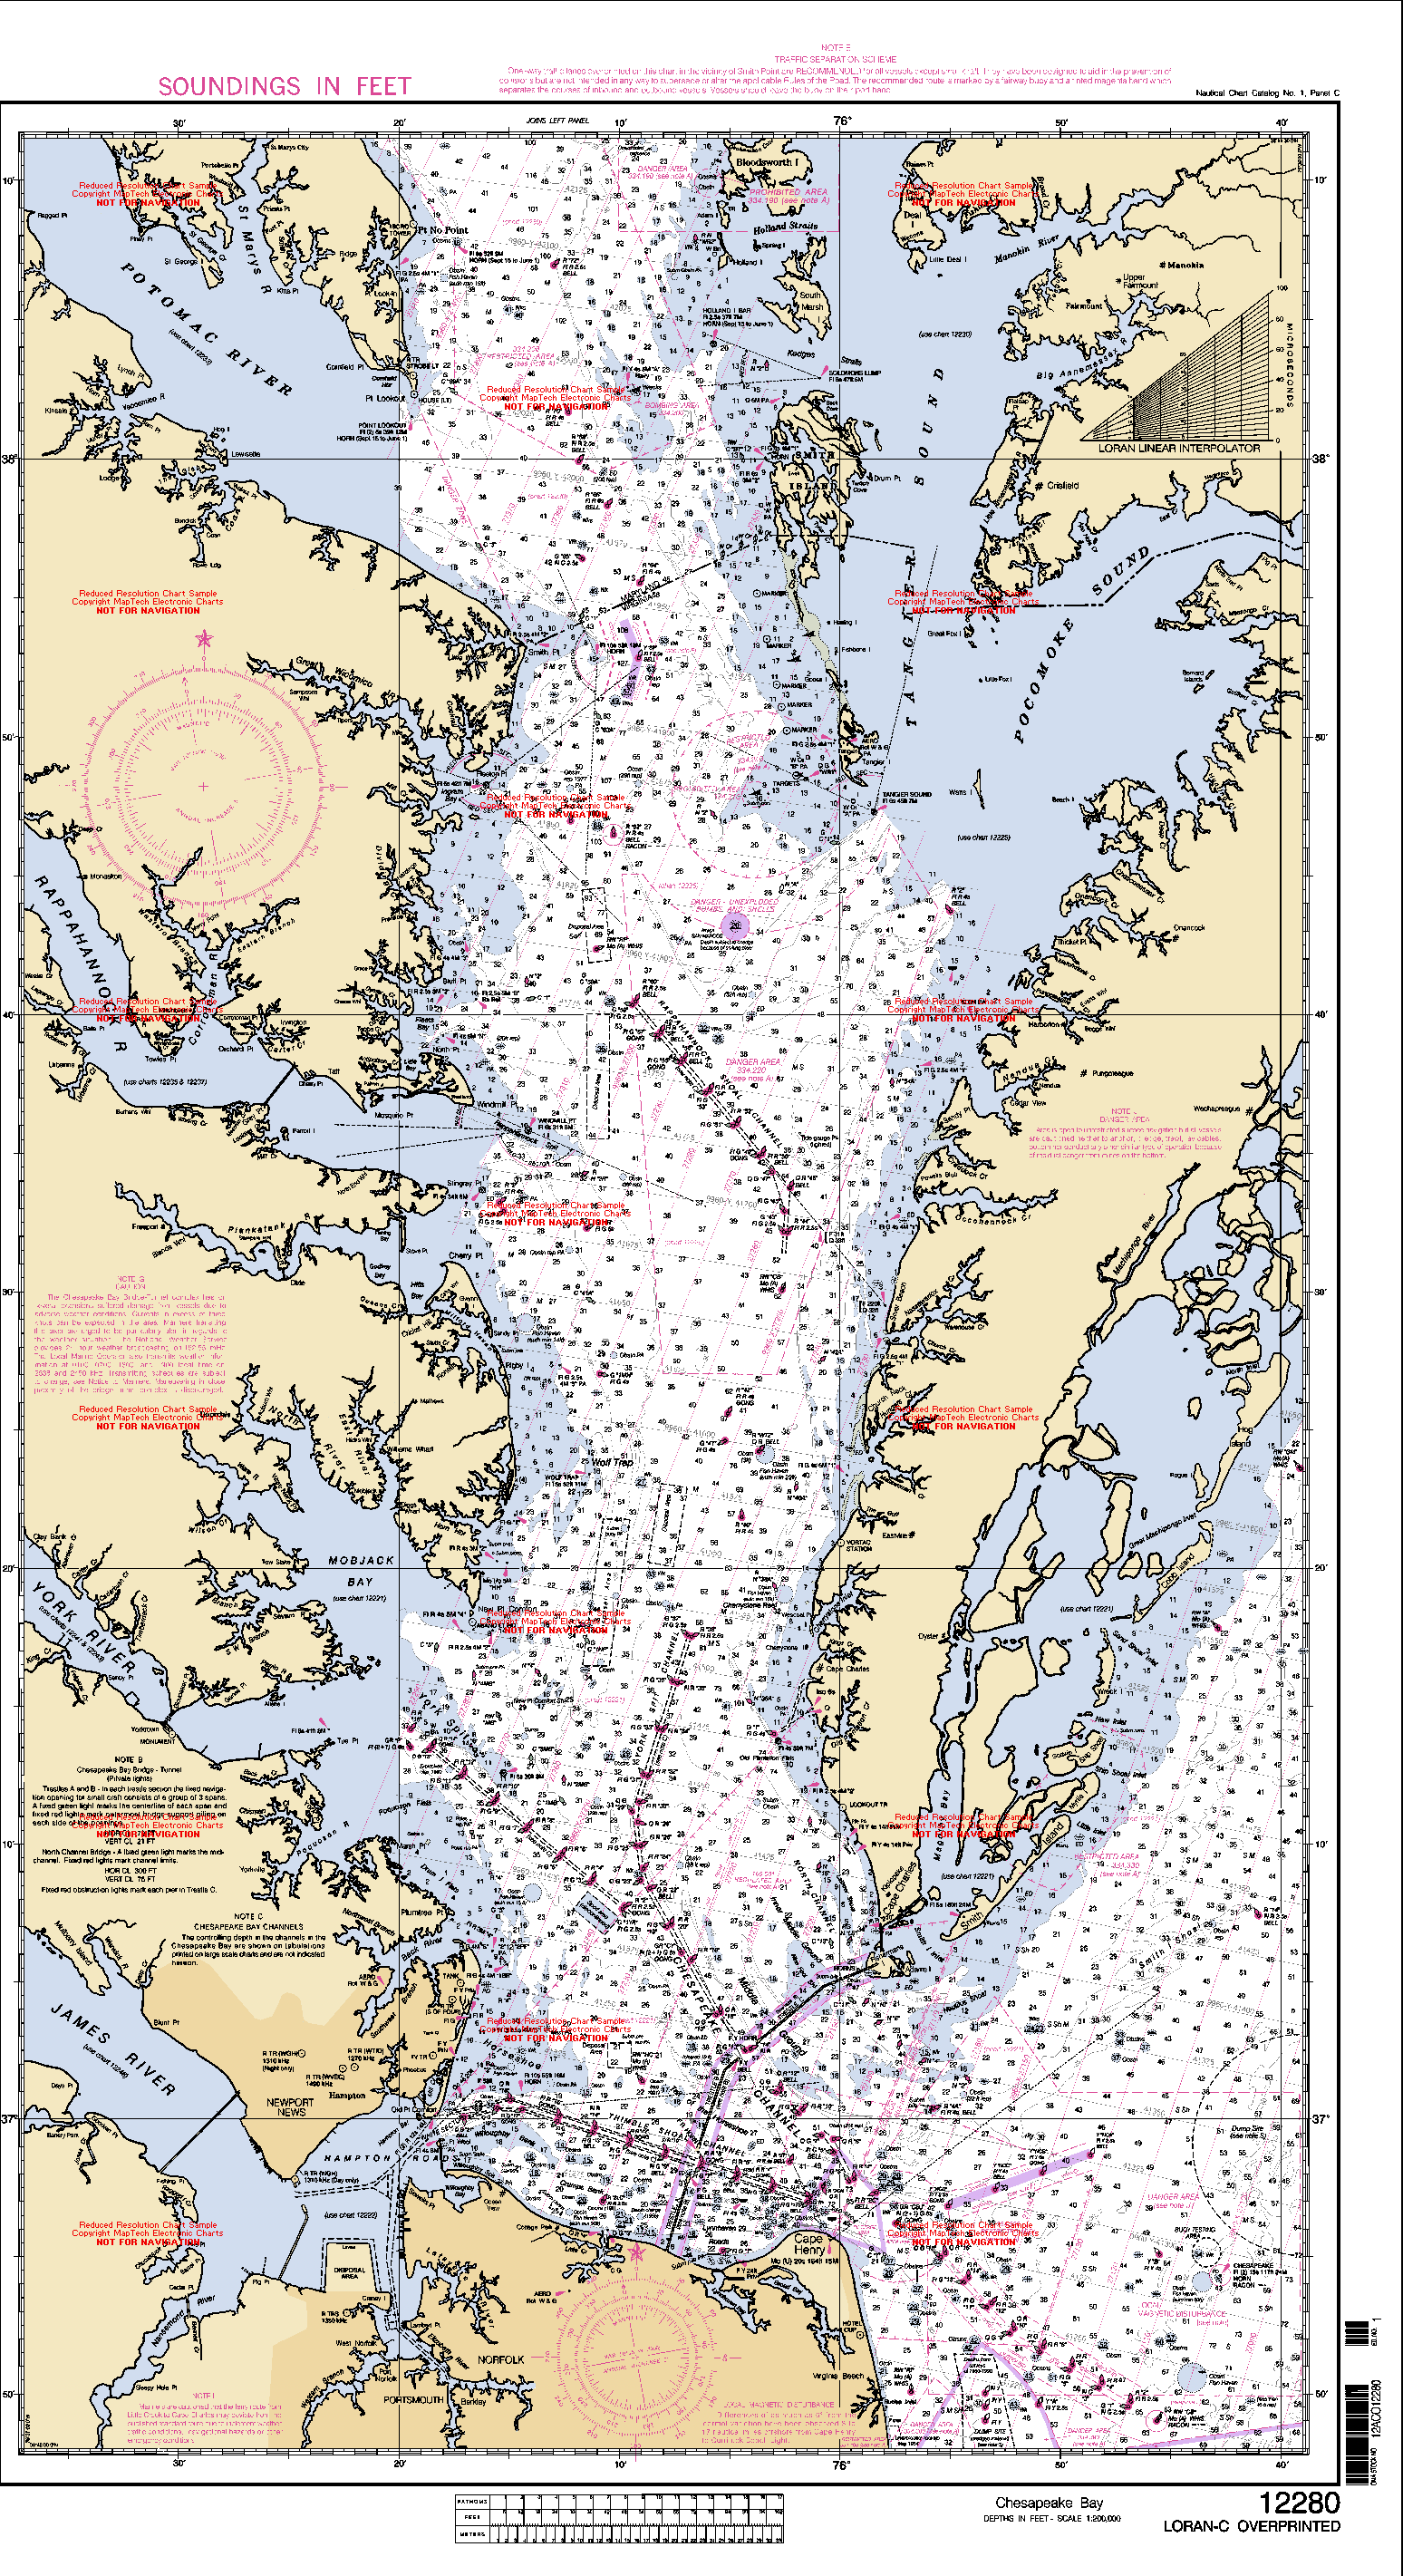 Anchorages along the Chesapeake Bay